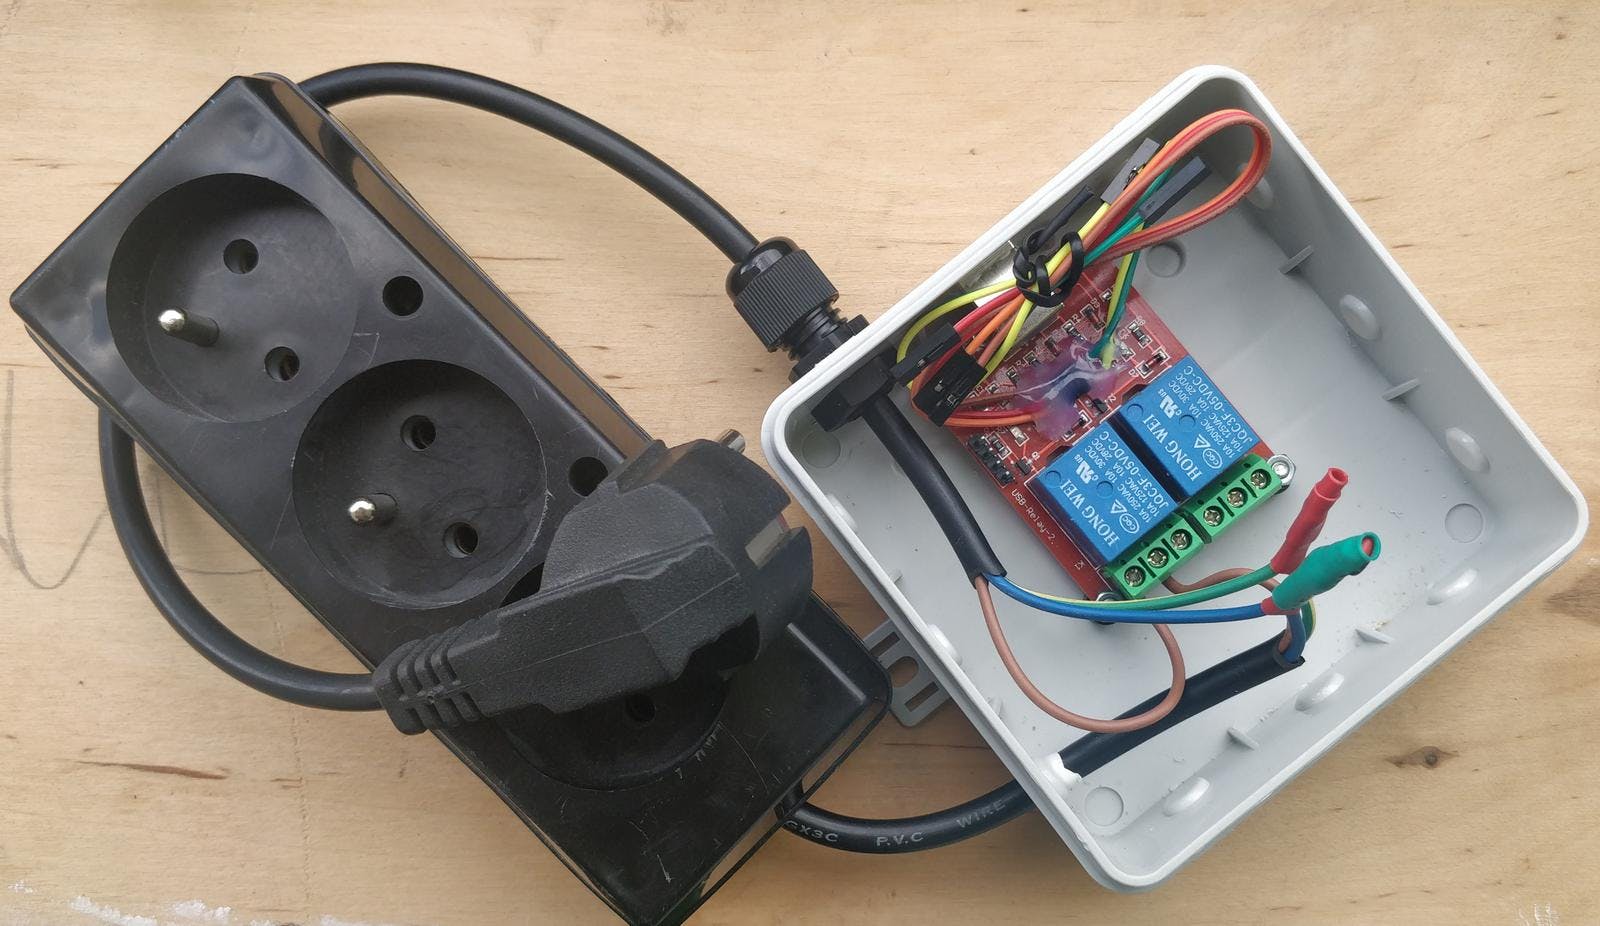 Christchurch Omvendt forgænger Let Your PC Control Peripheral Devices Using This USB-Controlled Power Strip  - Hackster.io